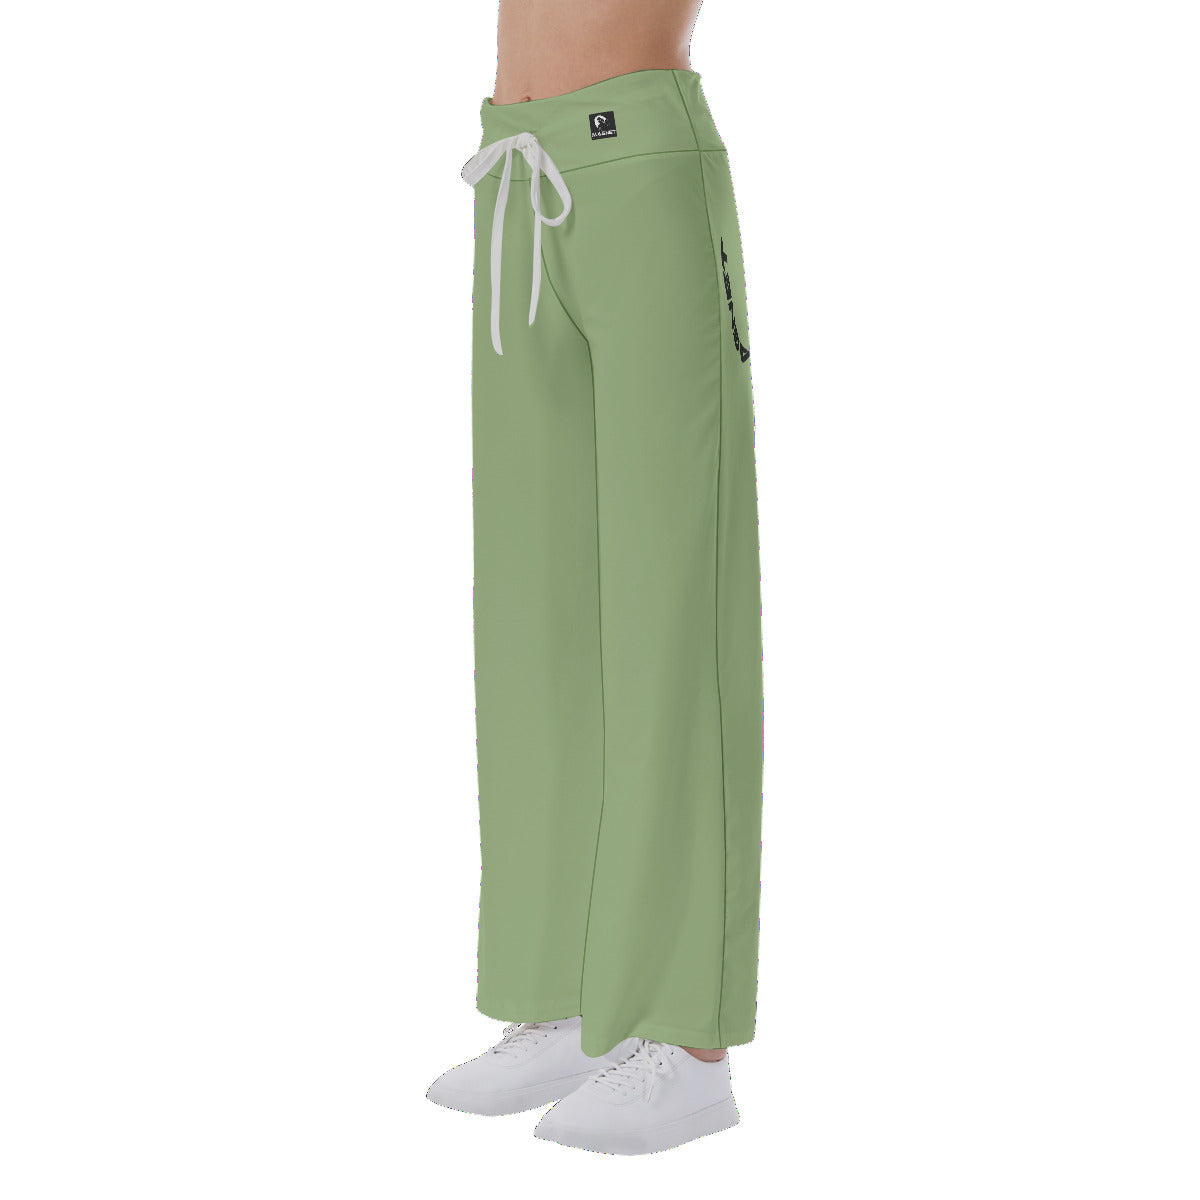 Magnet Cups Women's High-waisted Straight-leg Trousers